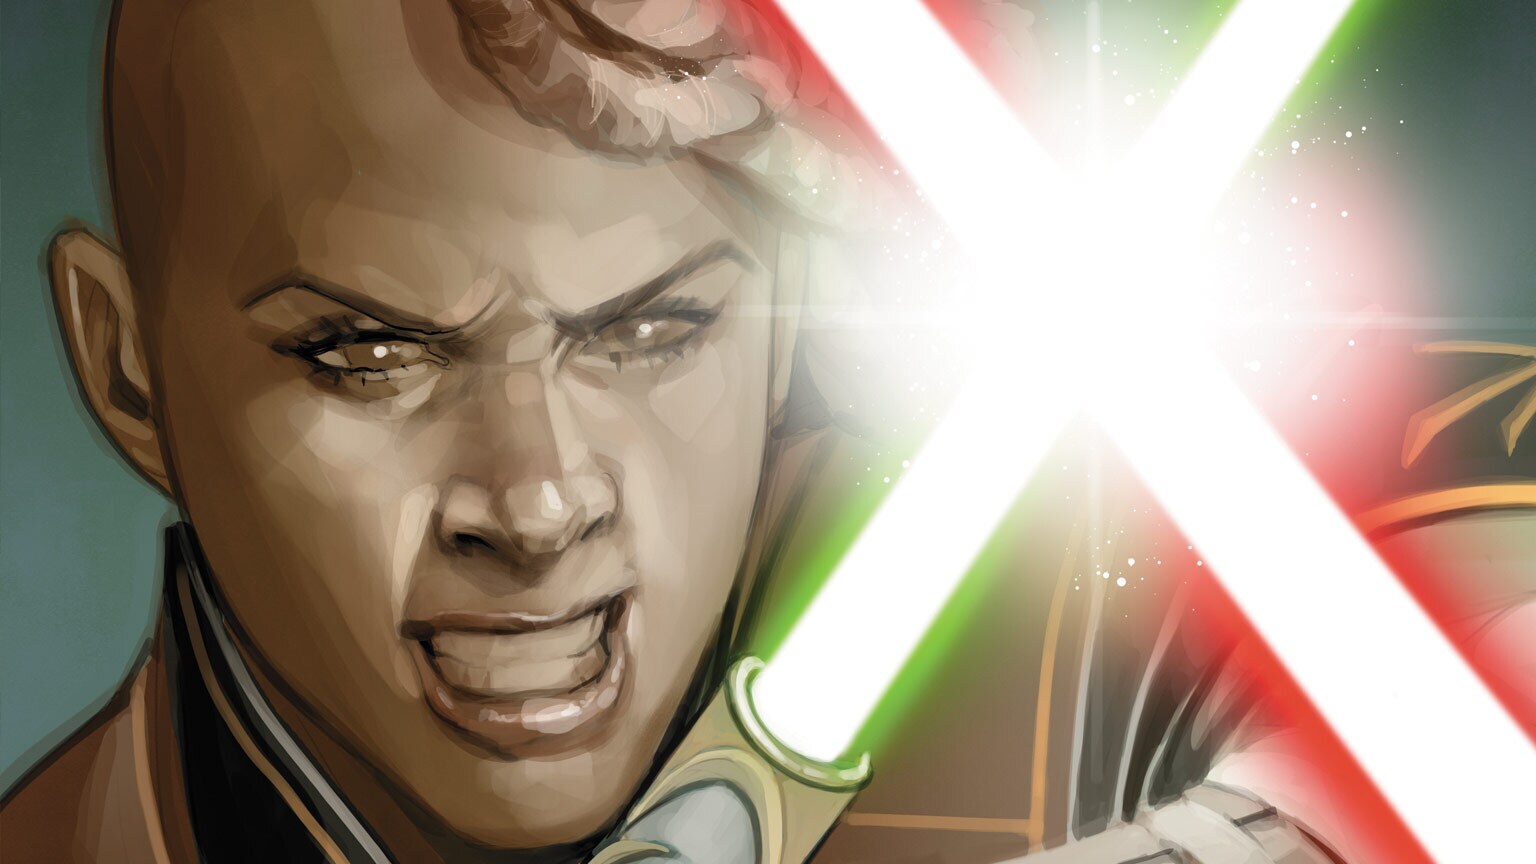 Keeve Trennis Tangles with a Red-Bladed Menace in Marvel's Star Wars: The High Republic #7 - Exclusive Preview